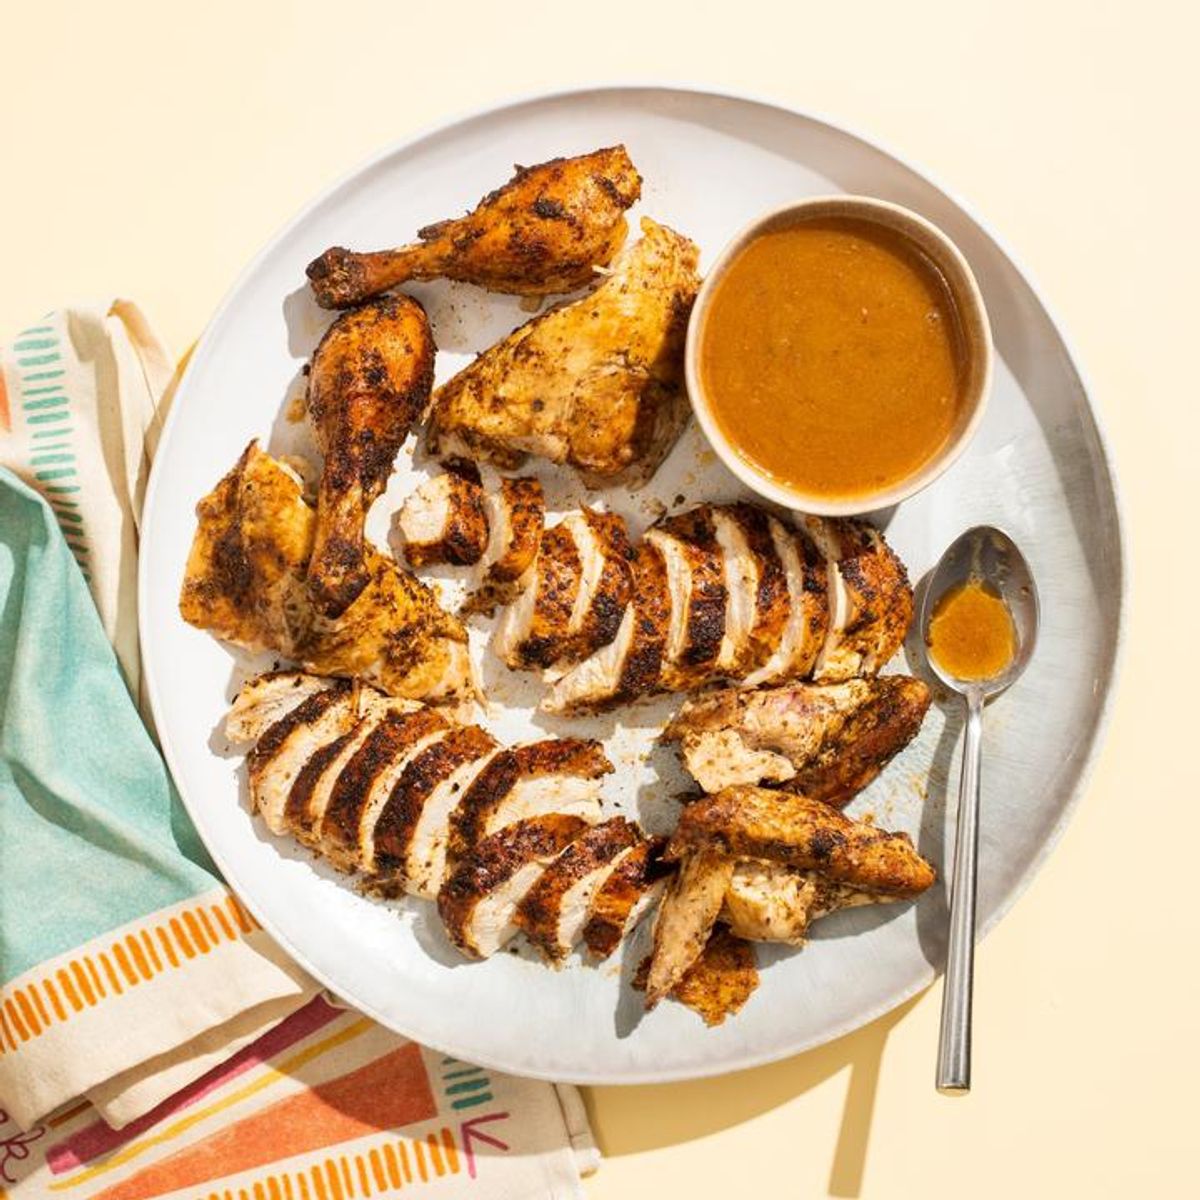 This Chicken Is One Of Our Favorite Healthy Chicken Recipes - Brit + Co